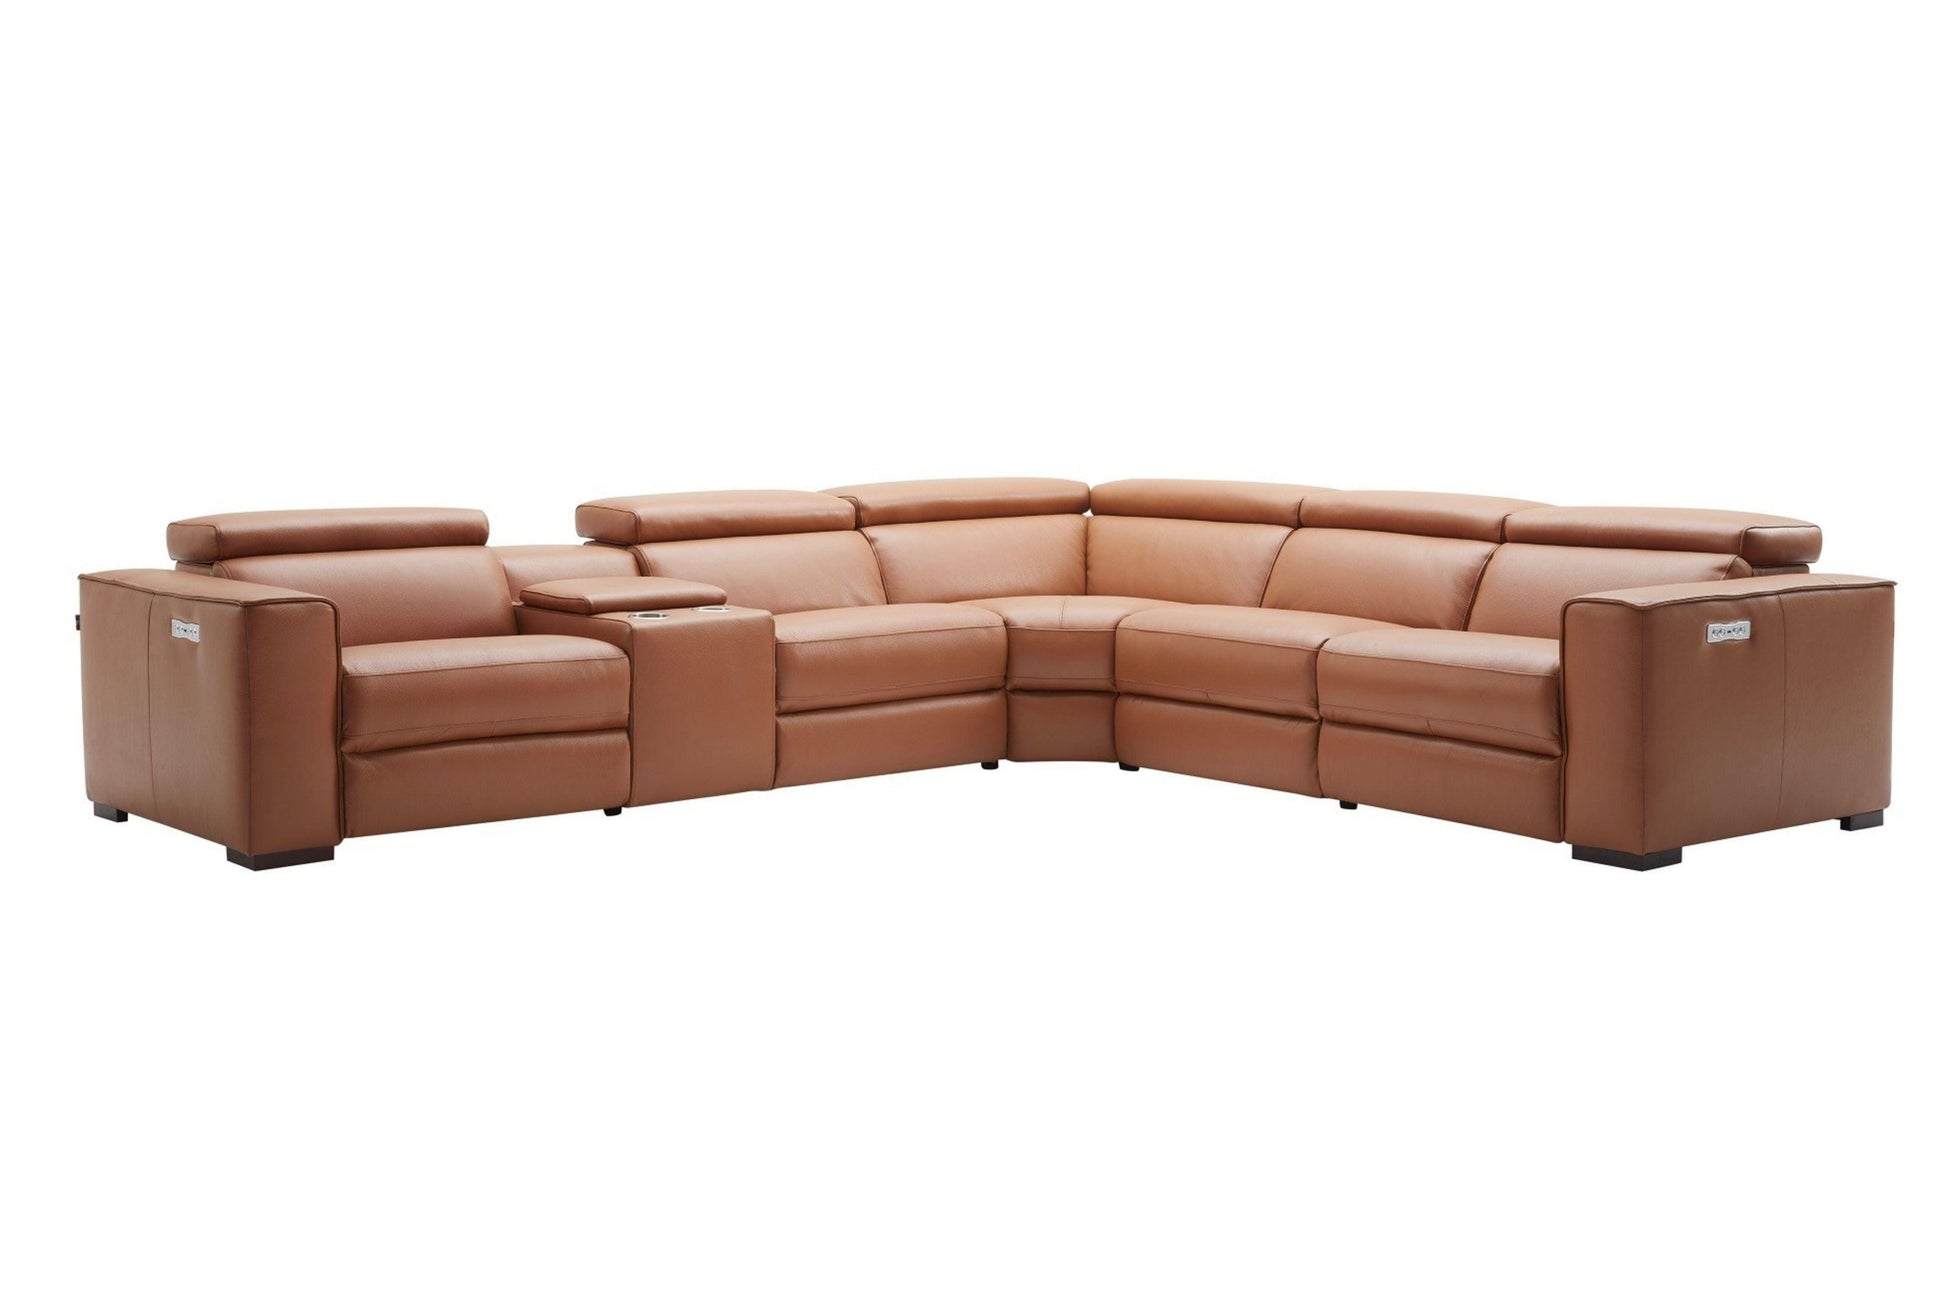 Picasso 6Pc Motion Sectional In Caramel - Venini Furniture 